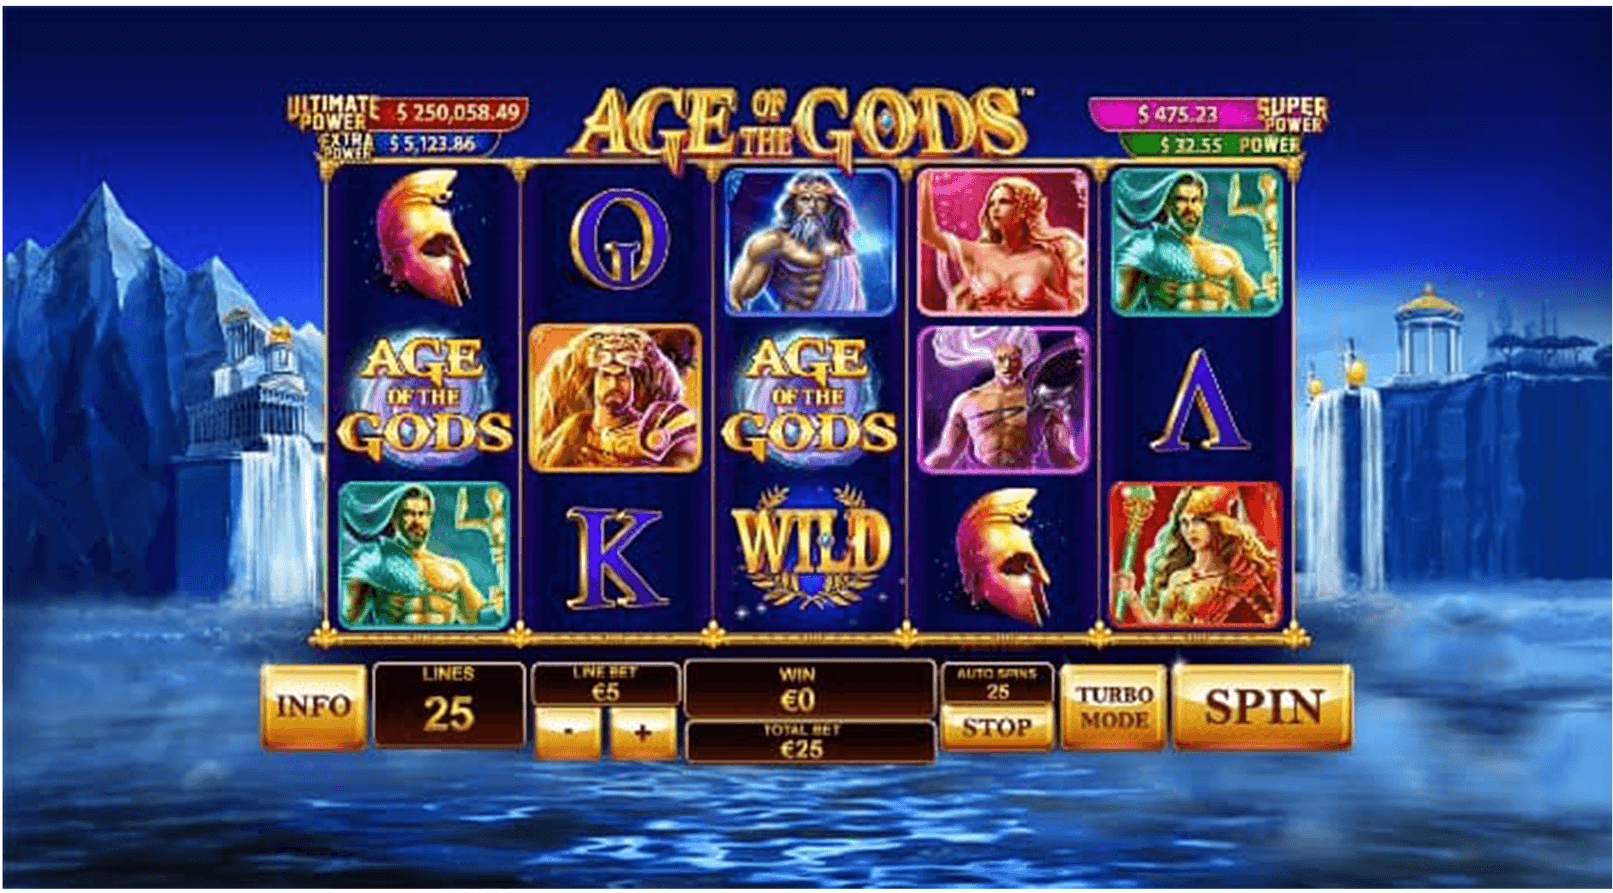 Age of the Gods slot features